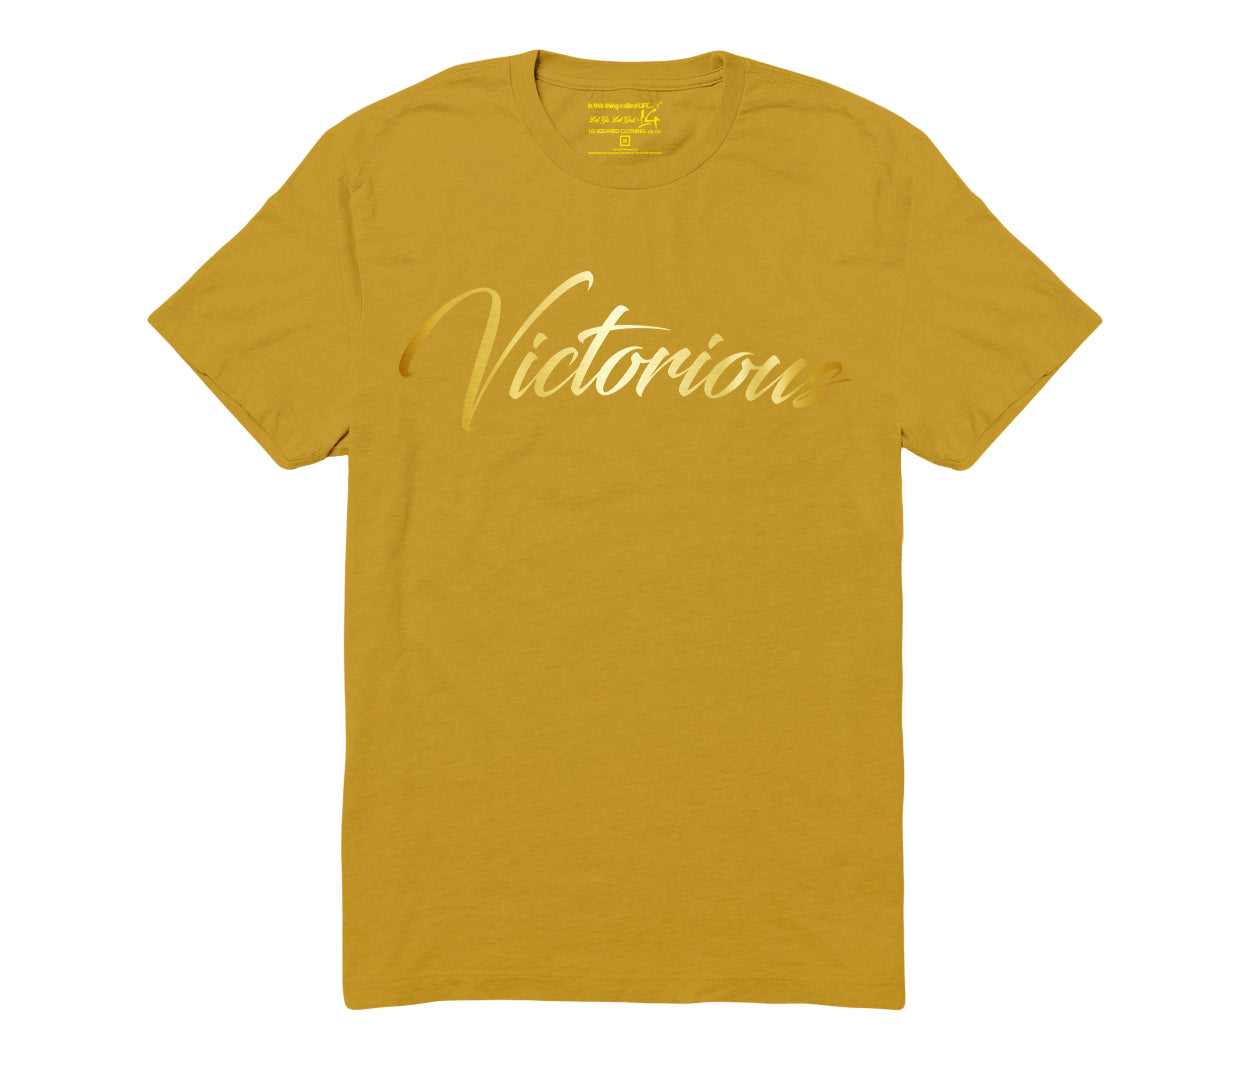 The Victorious Tee